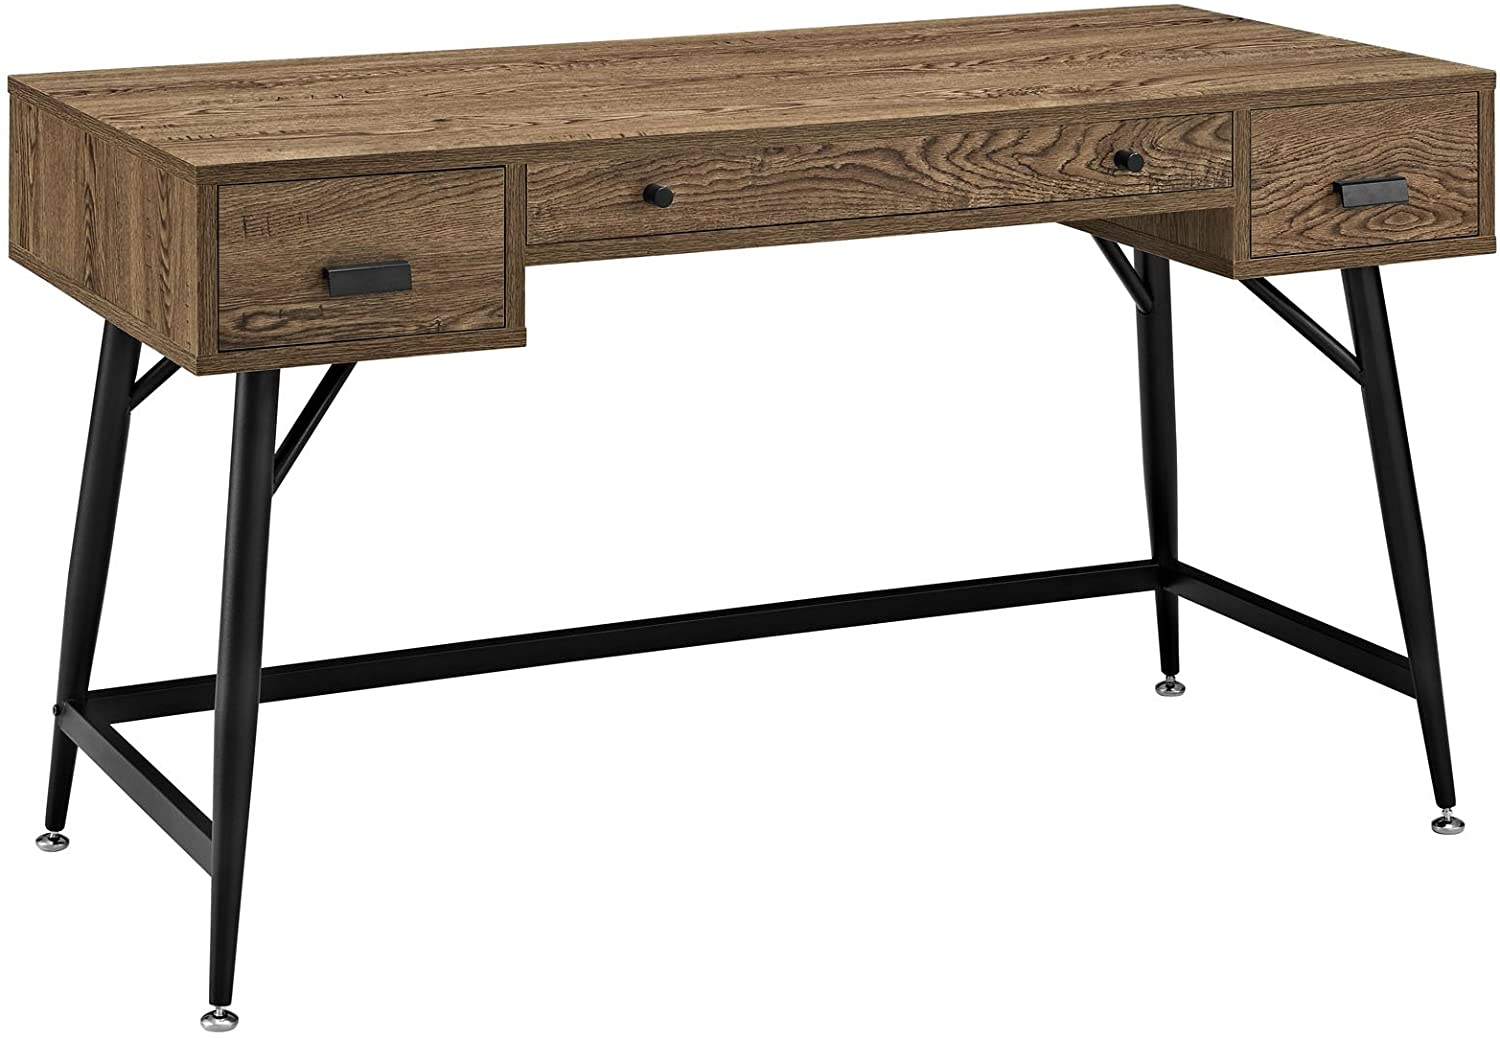 Wood Grain and Metal Writing Office Desk With Storage Drawers In Walnut